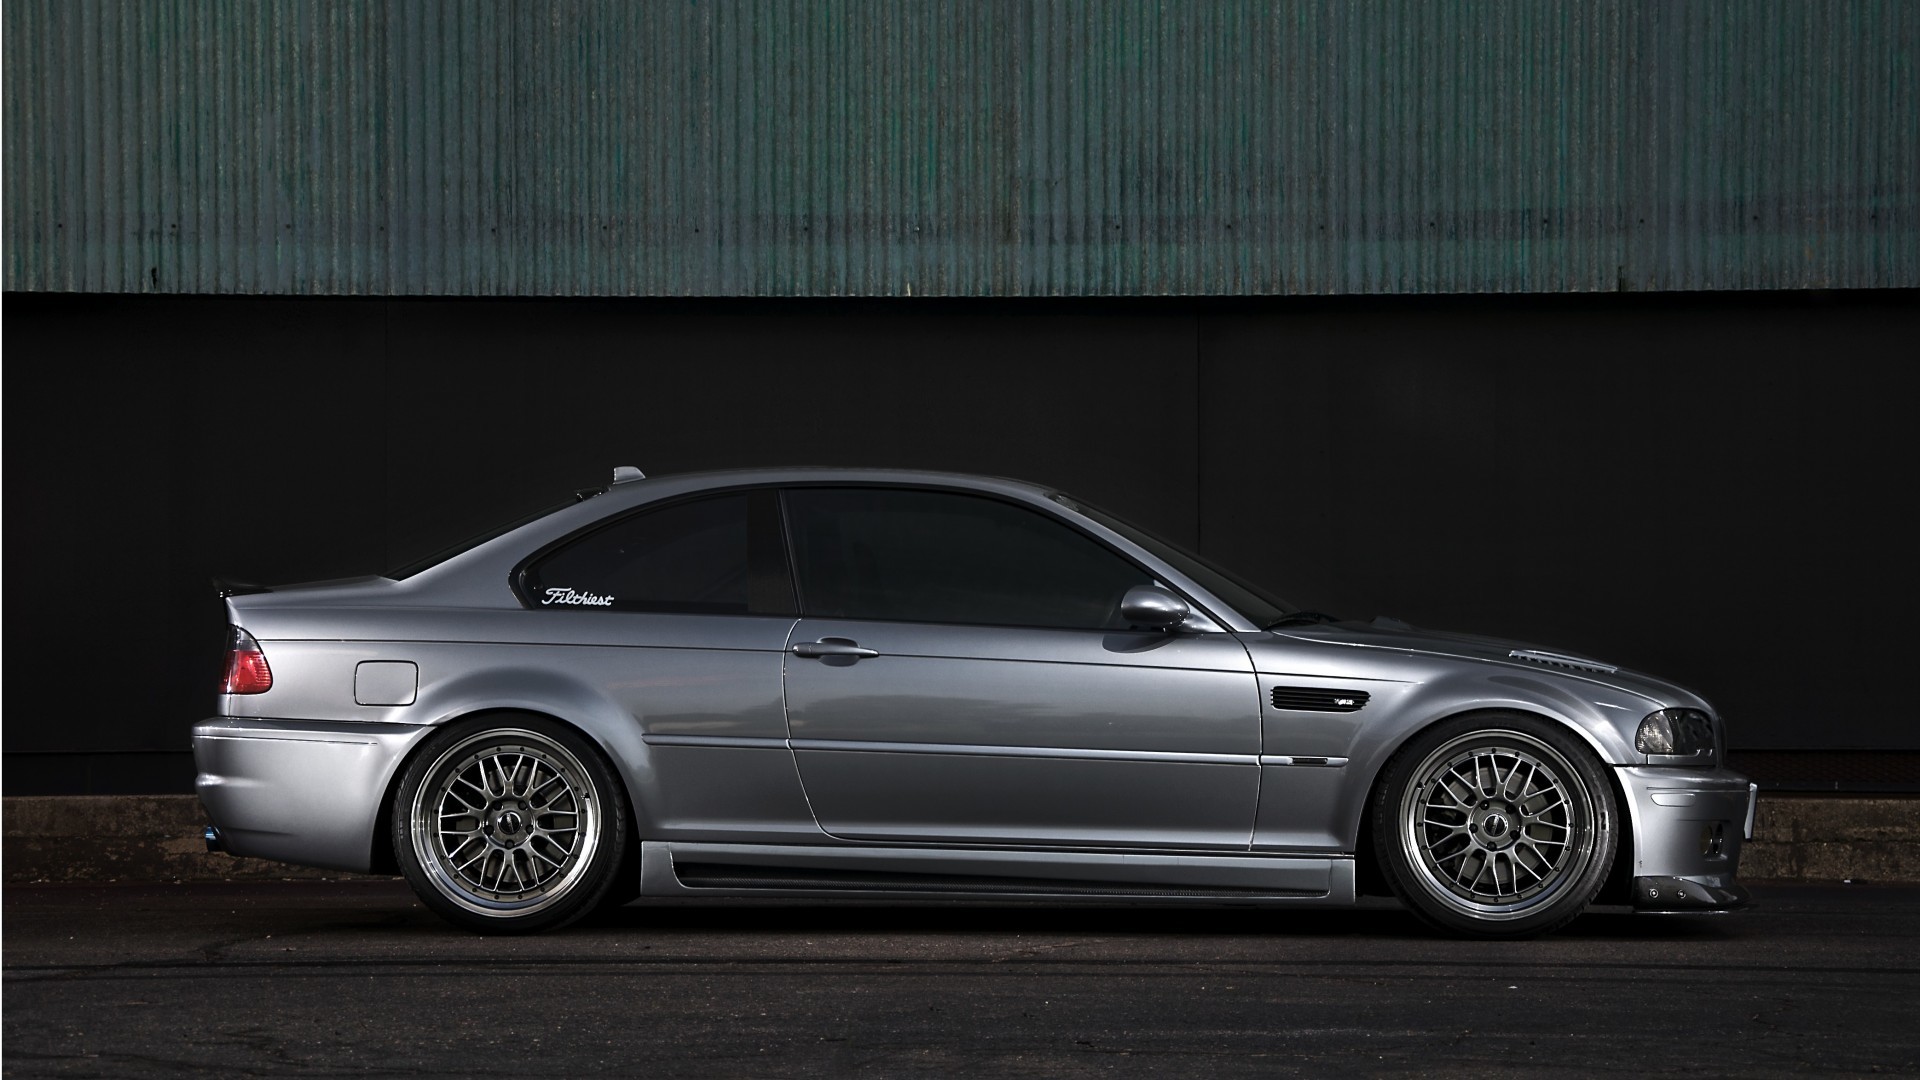 1920x1080 Bmw E46 M3 Backgrounds Download 